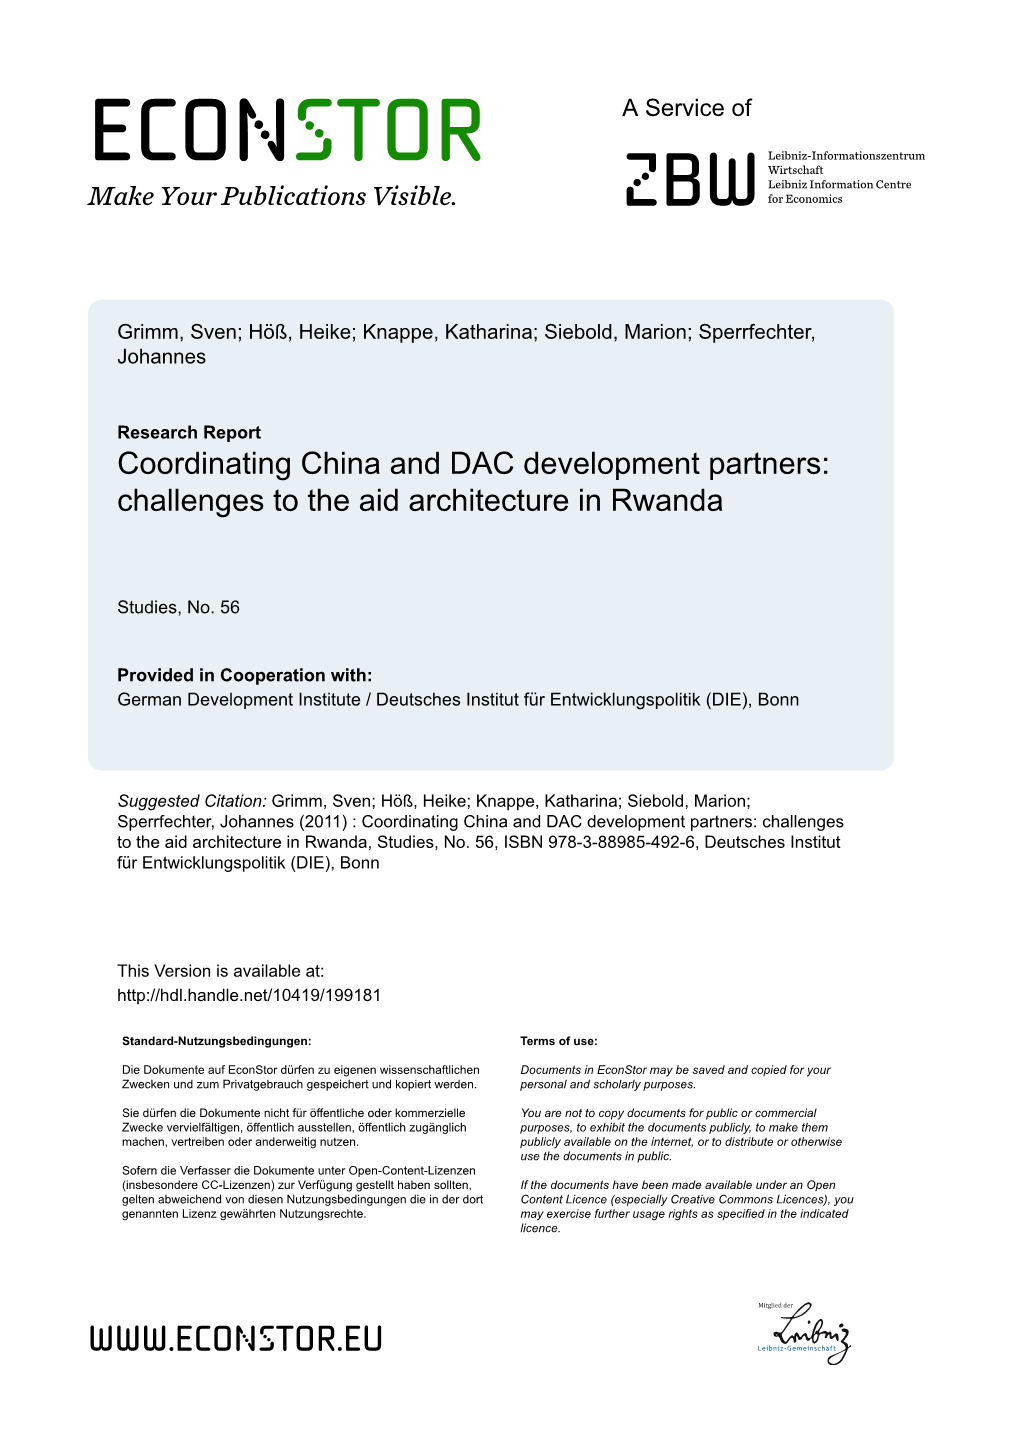 Coordinating China and DAC Development Partners: Challenges to the Aid Architecture in Rwanda